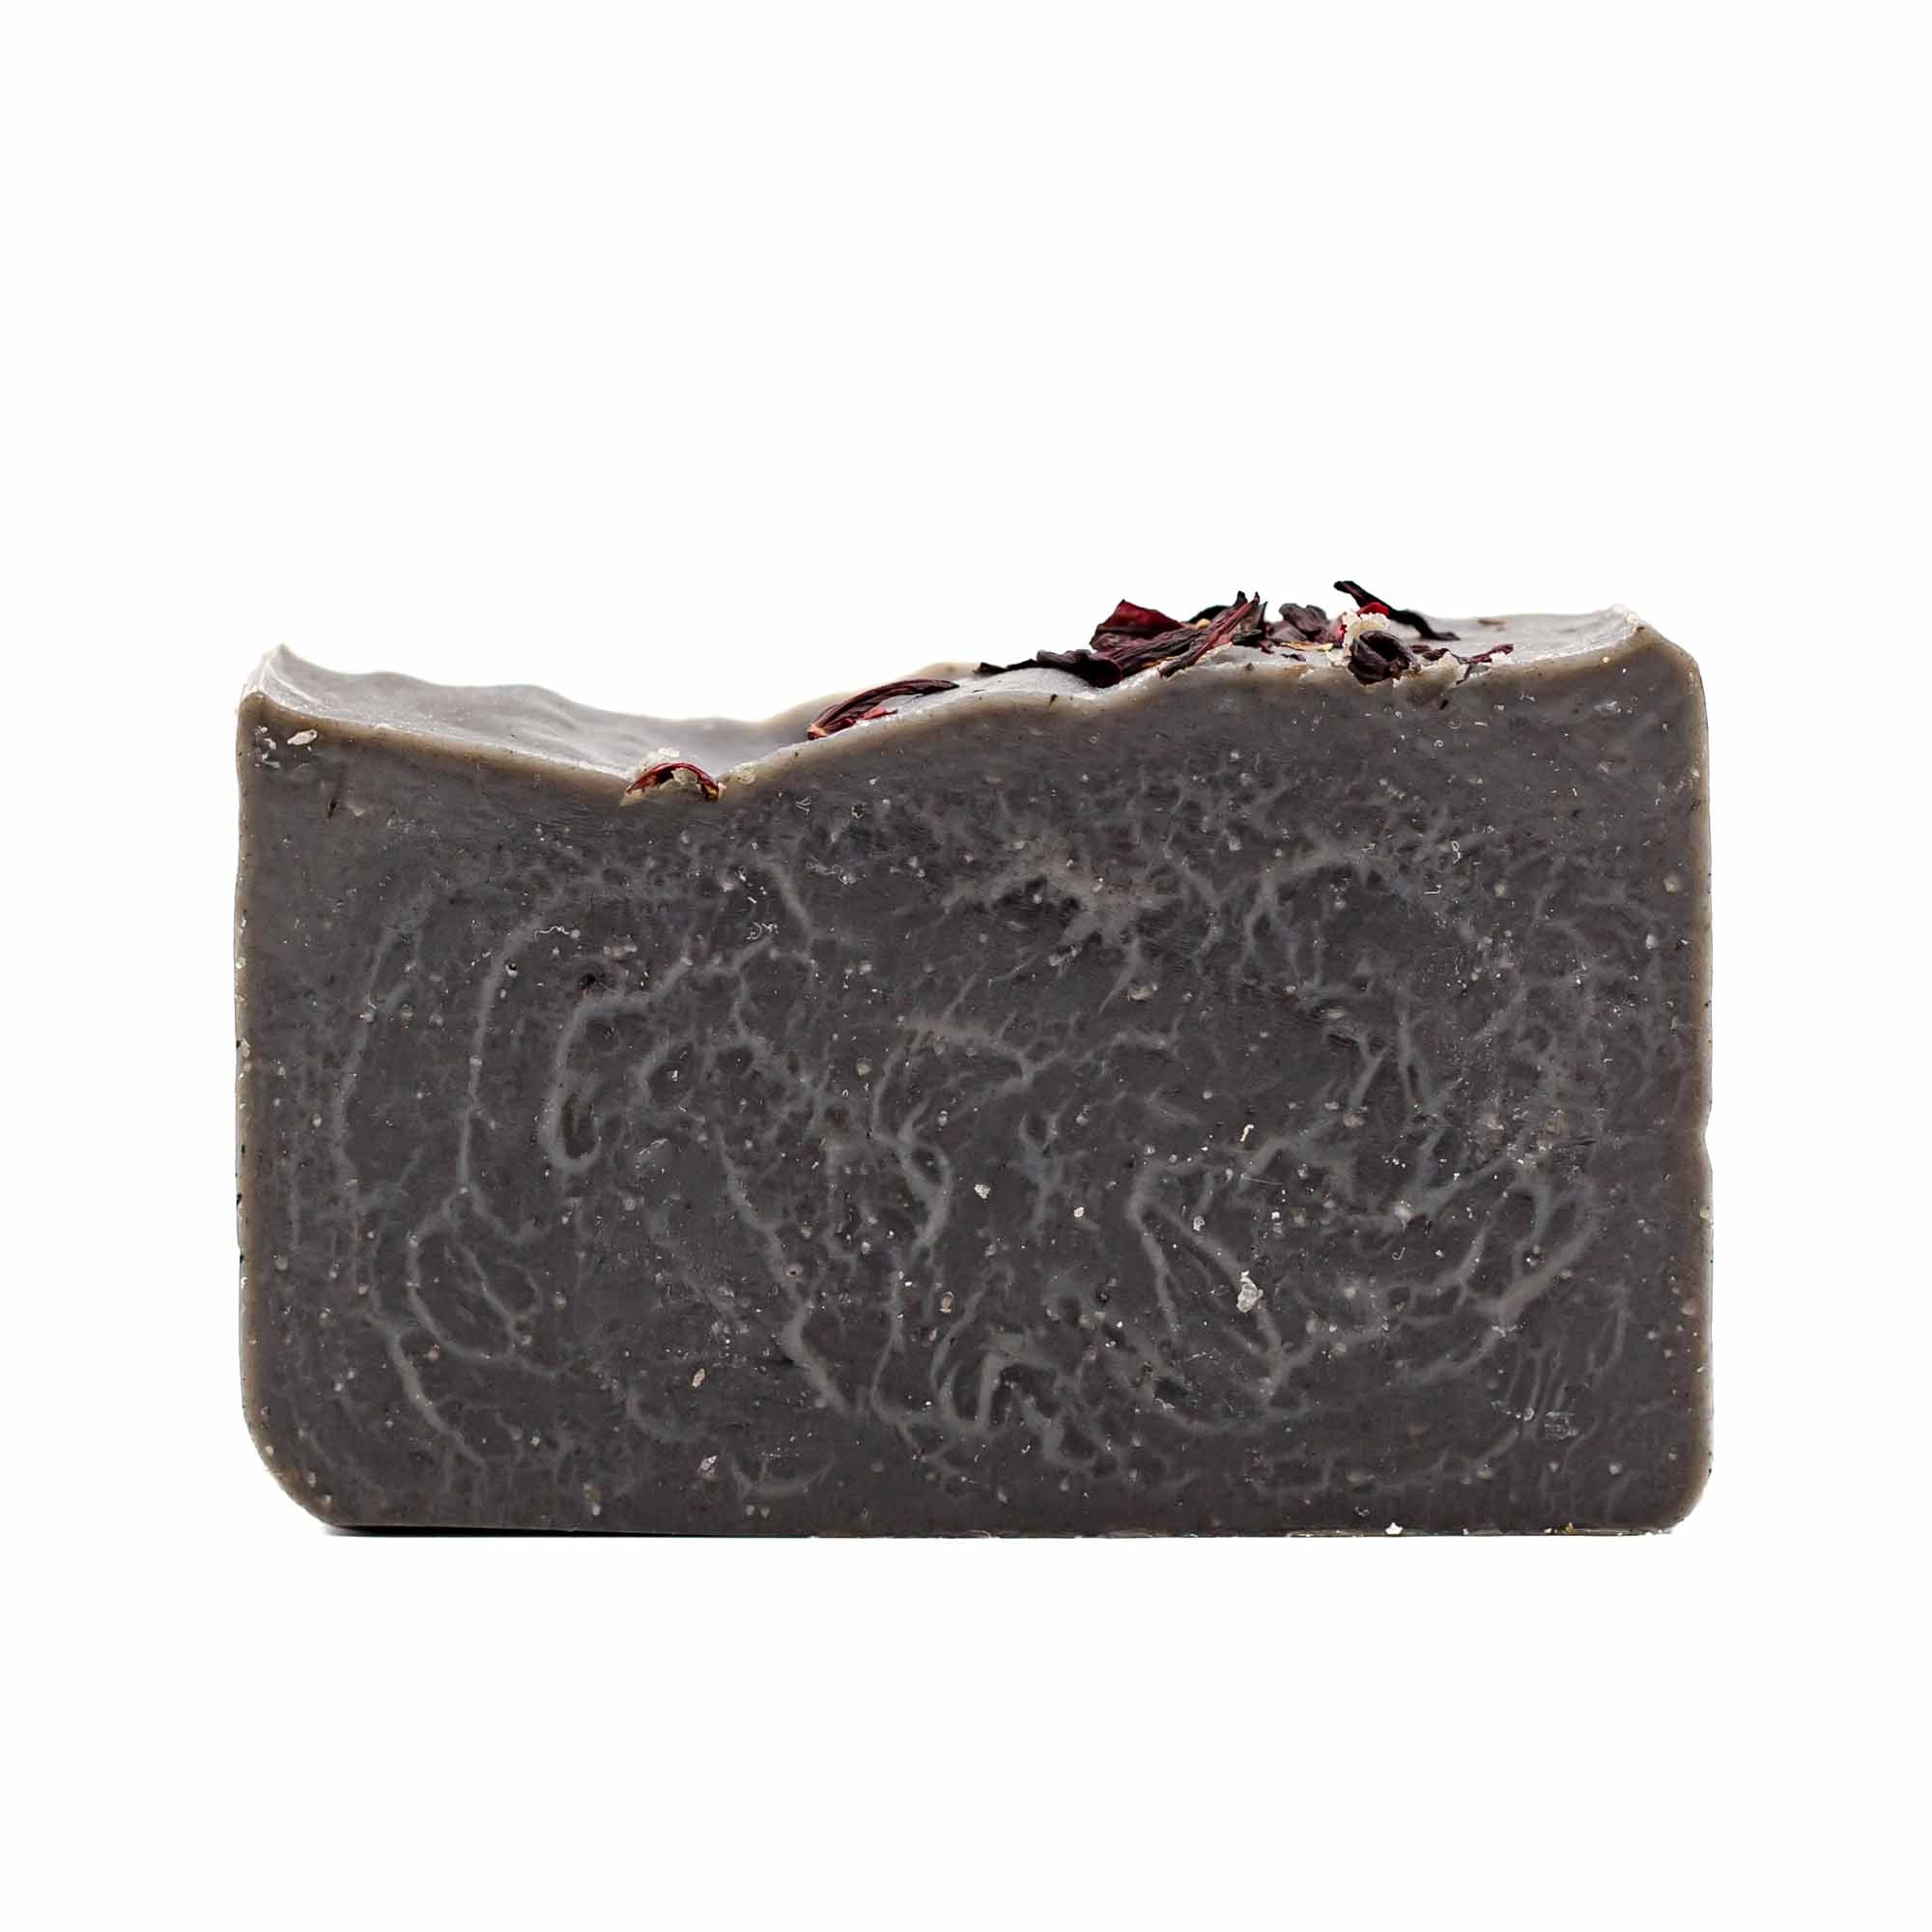 welliver goods - sandalwood & clay bar soap - Mortise And Tenon